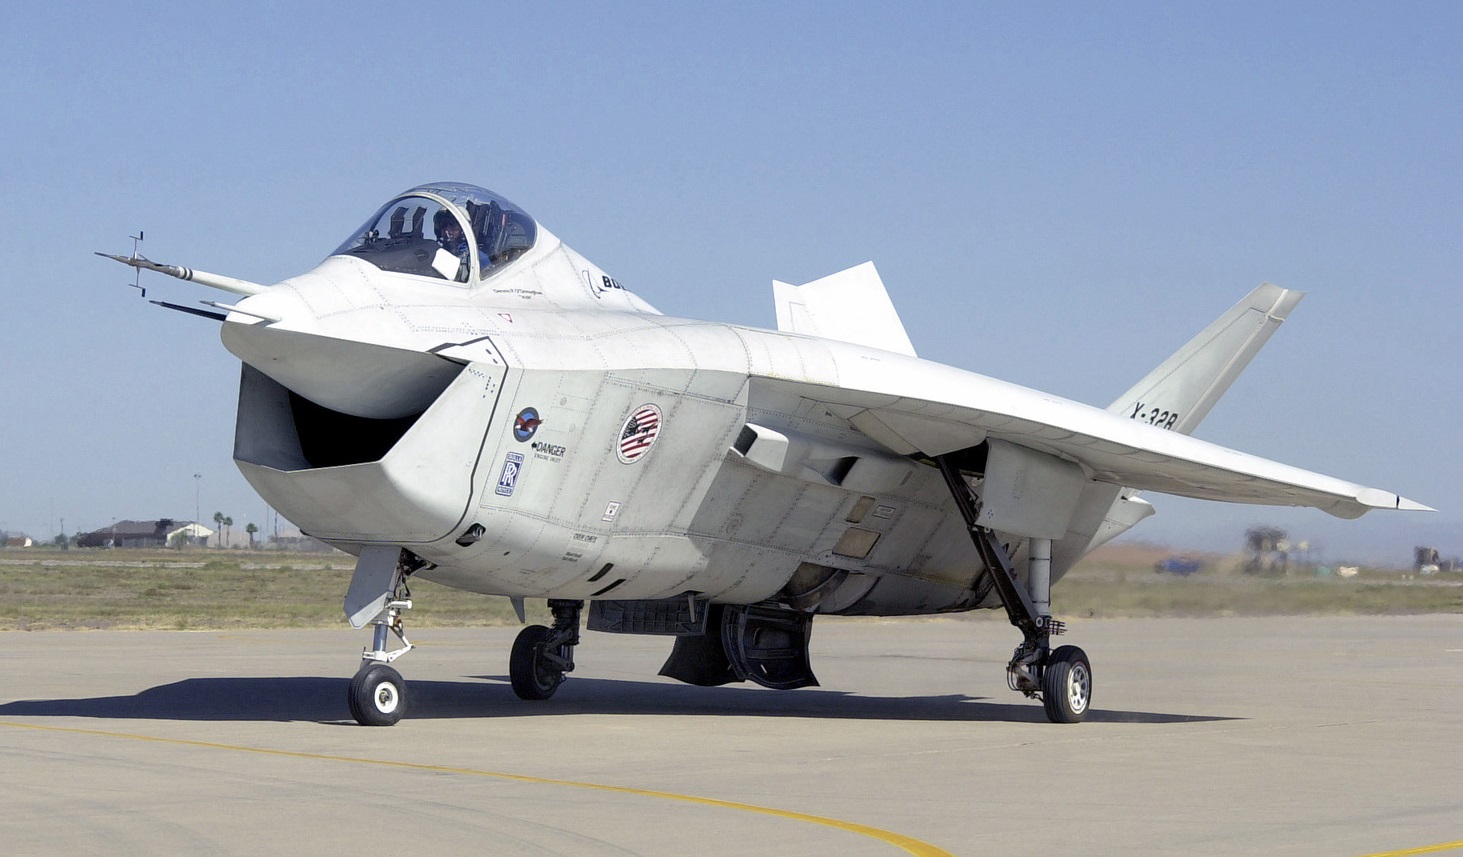 the-boeing-joint-strike-fighter-jsf-x-32b-taxies-out-after-a-stop-at-a-hot-dc2174-1600.jpg